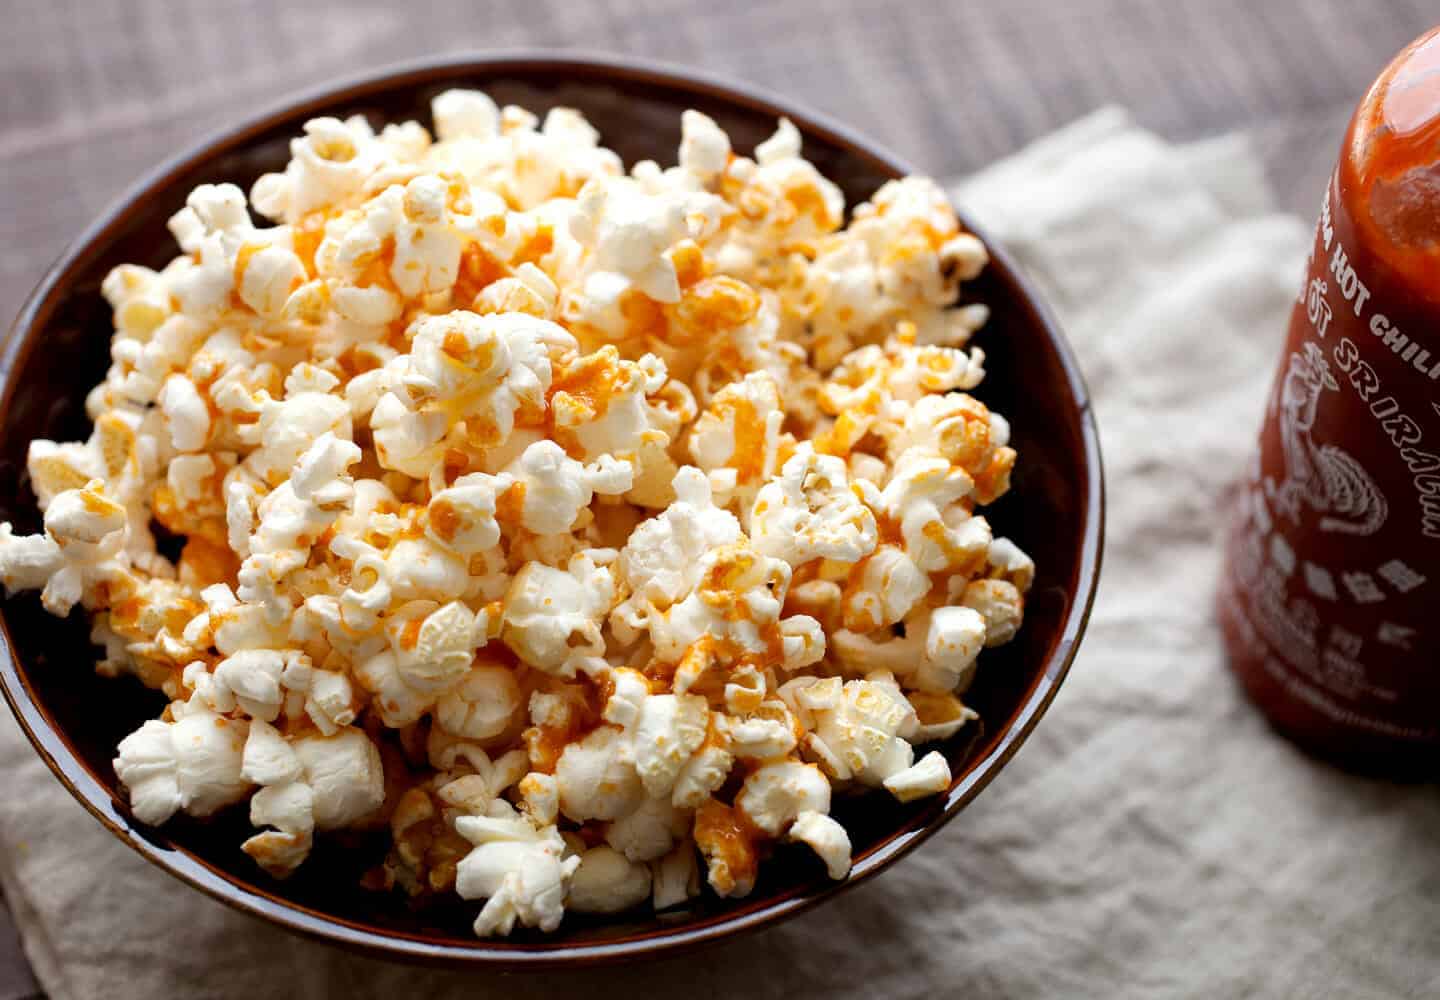 Brown Butter Sriracha Popcorn: Possibly the most addictive popcorn I've ever had. Slightly sweet with a hint of brown butter and just enough spice. Gotta love good popcorn! | macheesmo.com